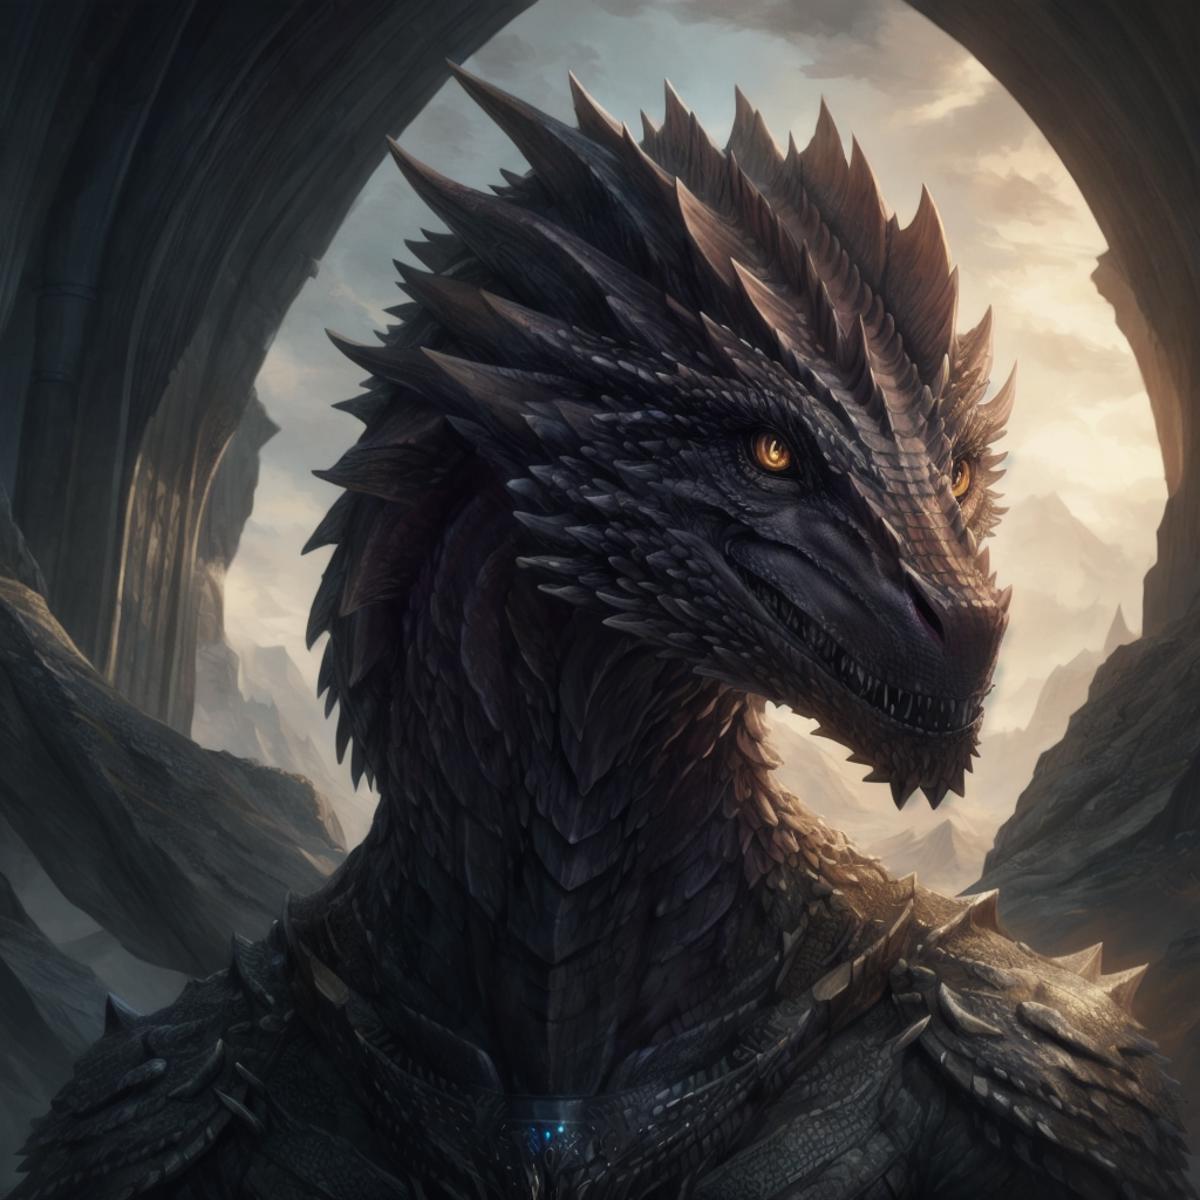 Drogon – (Game of Thrones) image by Homann45